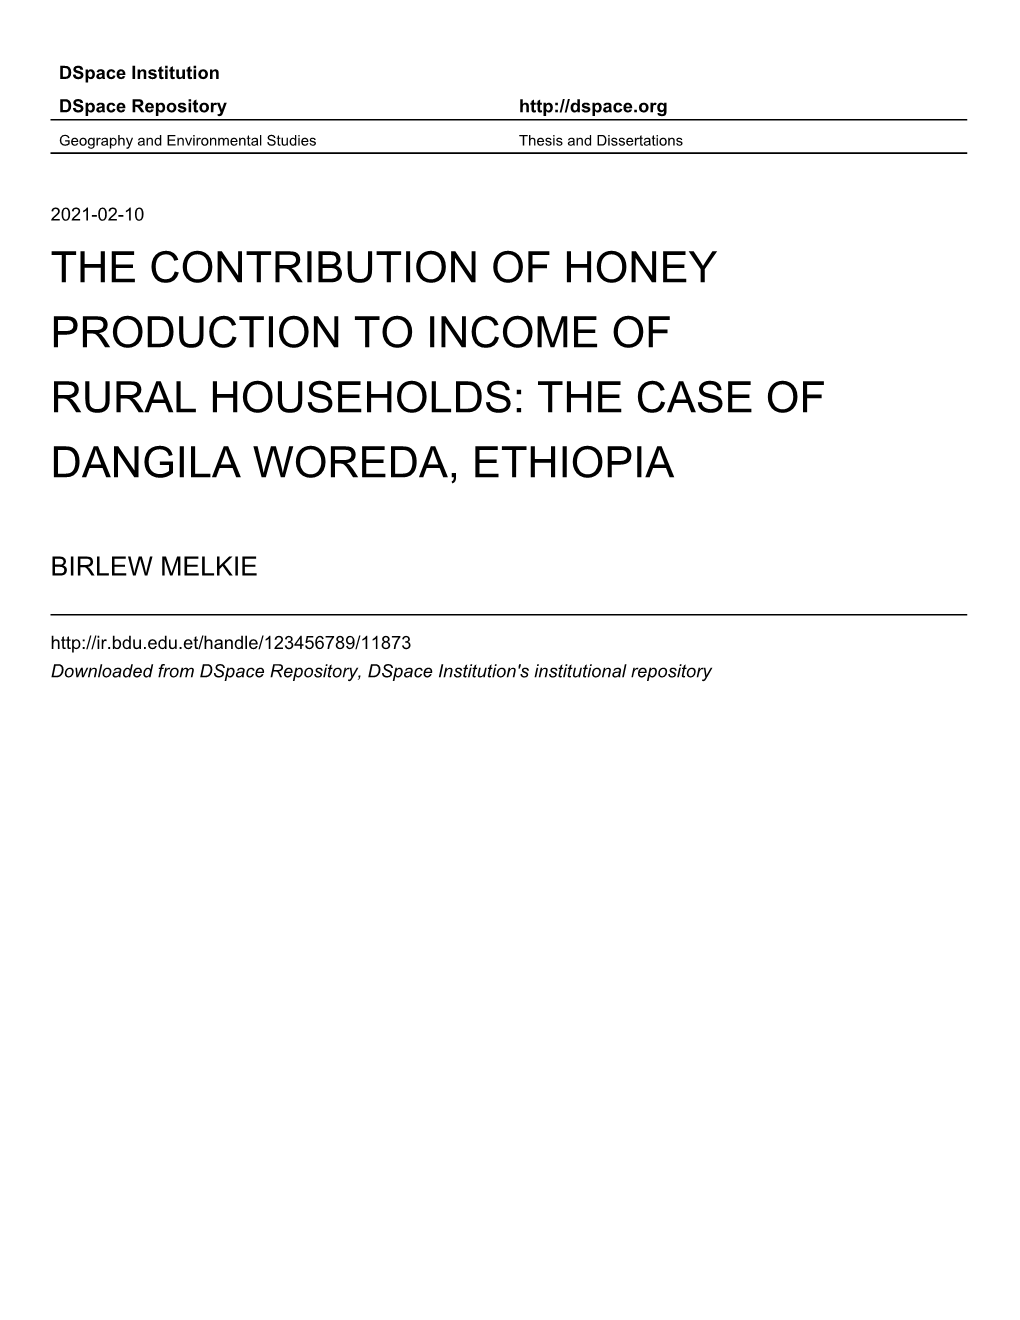 The Contribution of Honey Production to Income of Rural Households: the Case of Dangila Woreda, Ethiopia